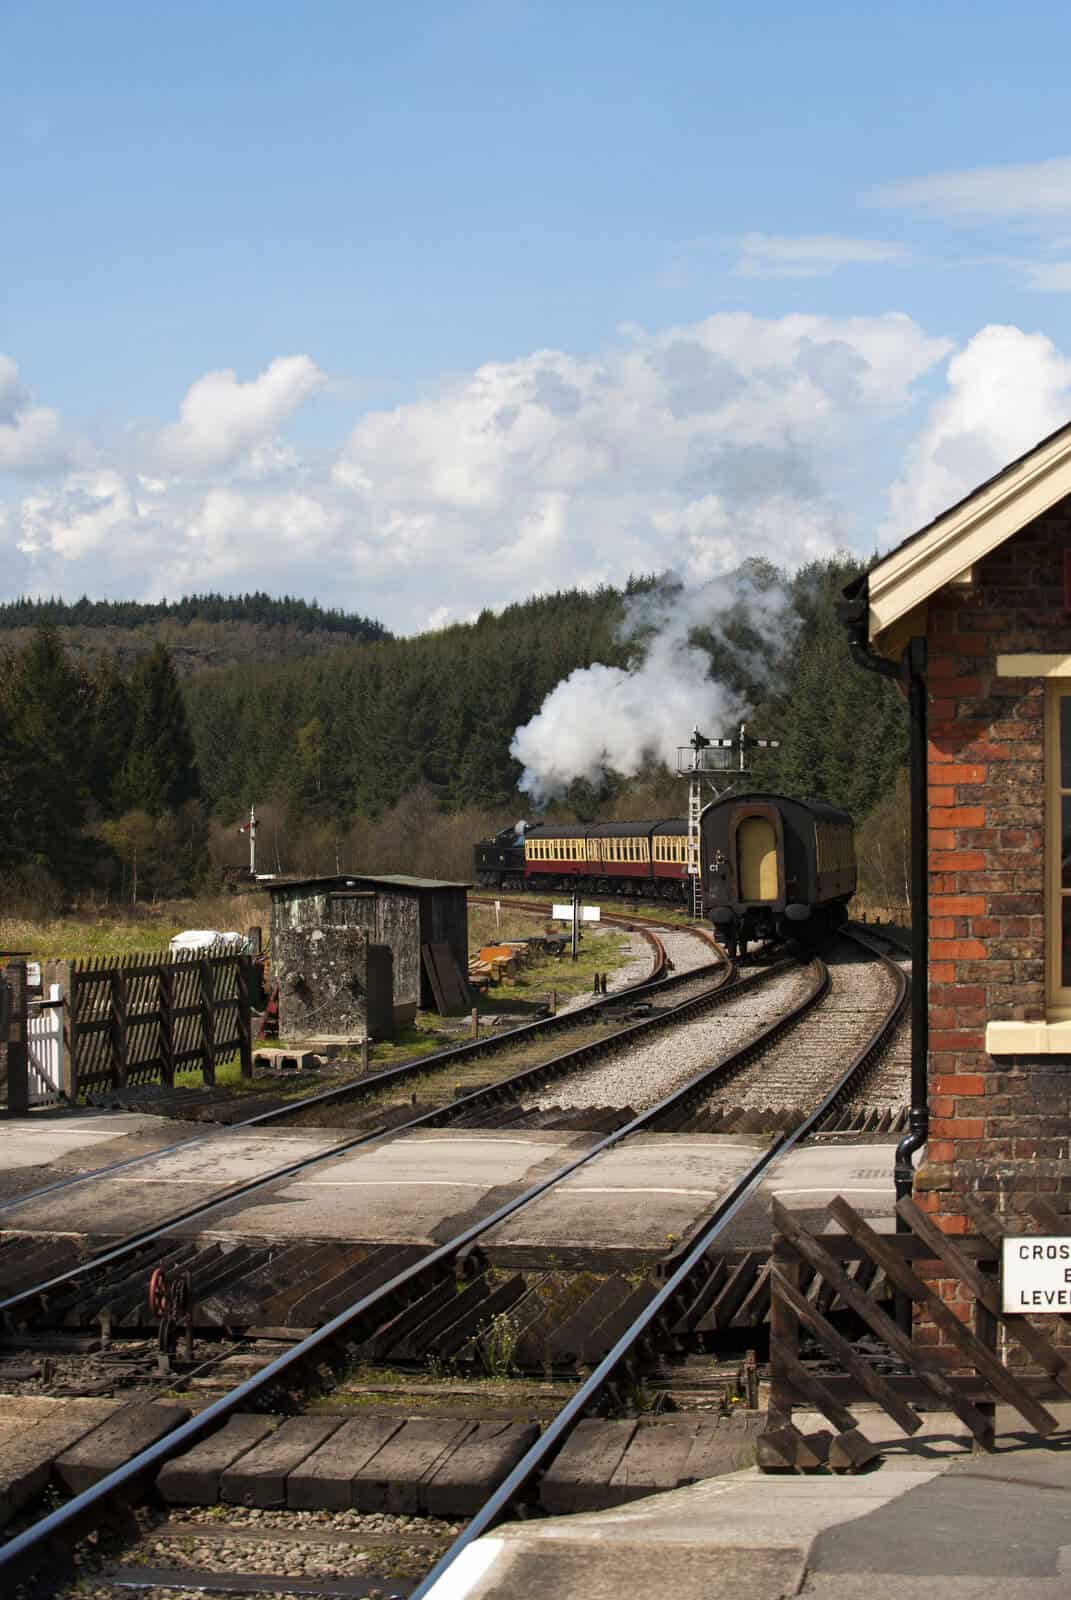 View of the North York Moors Steam train approaching a station